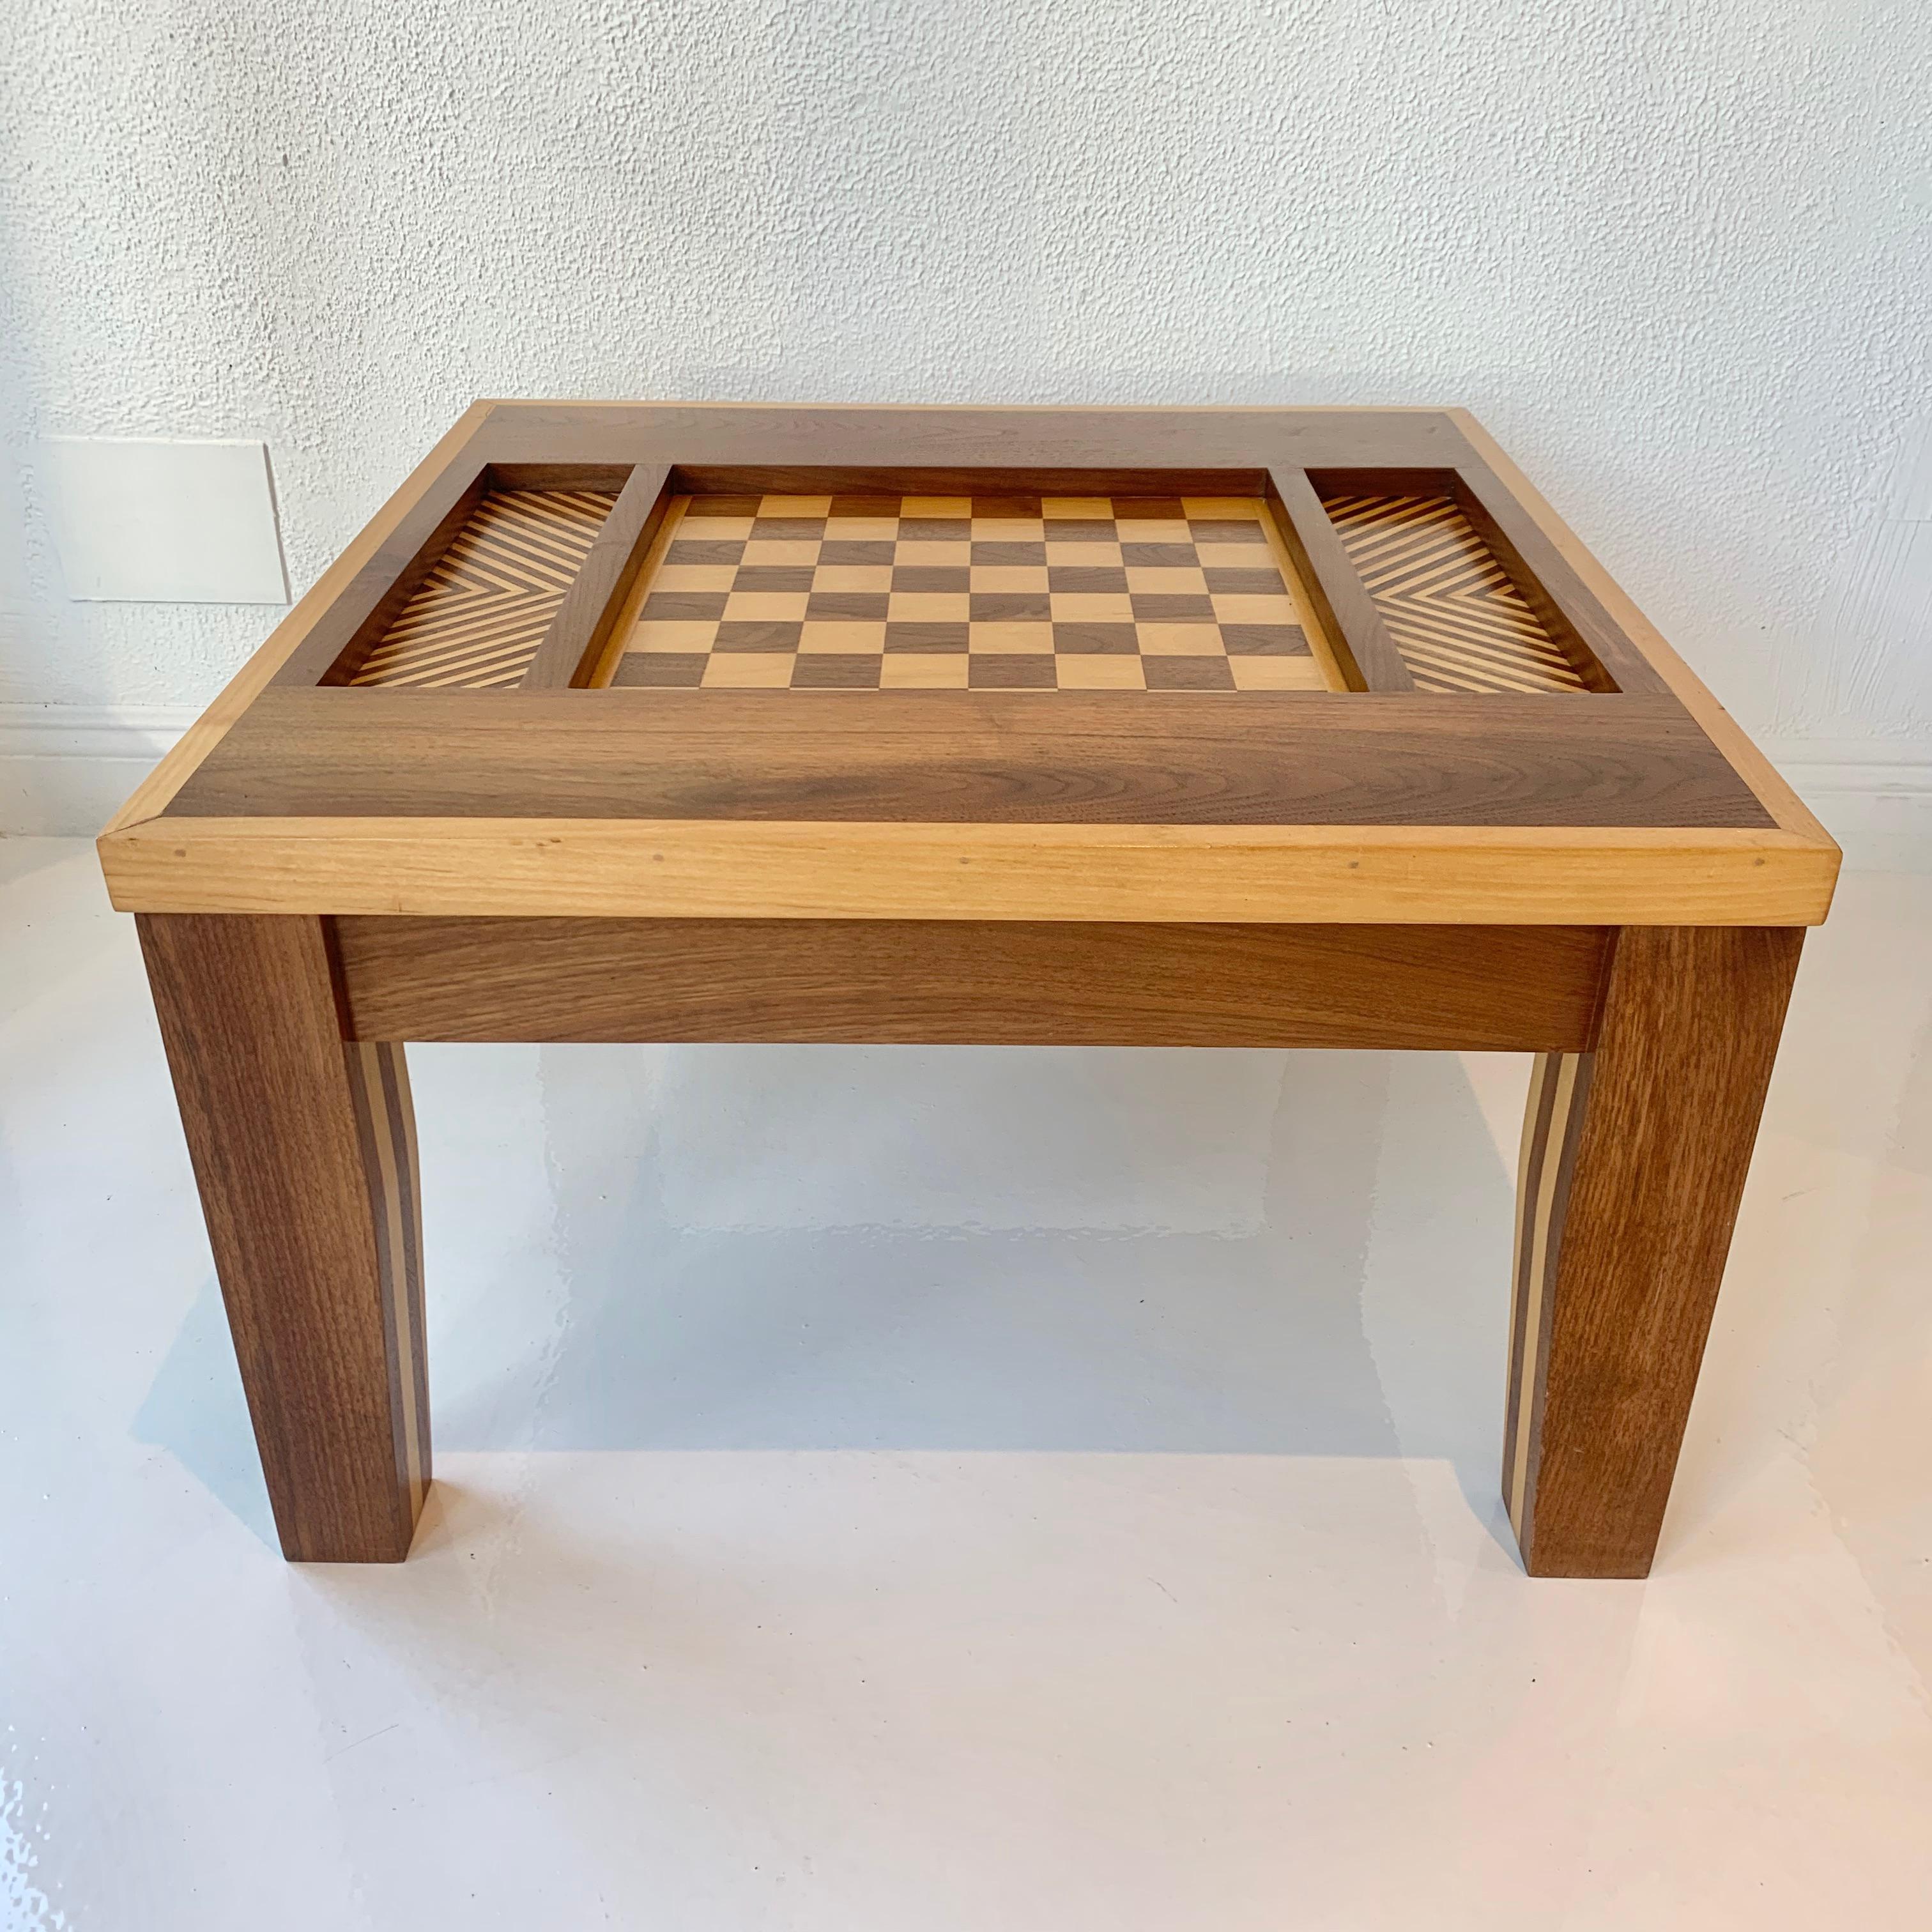 used chess table for sale